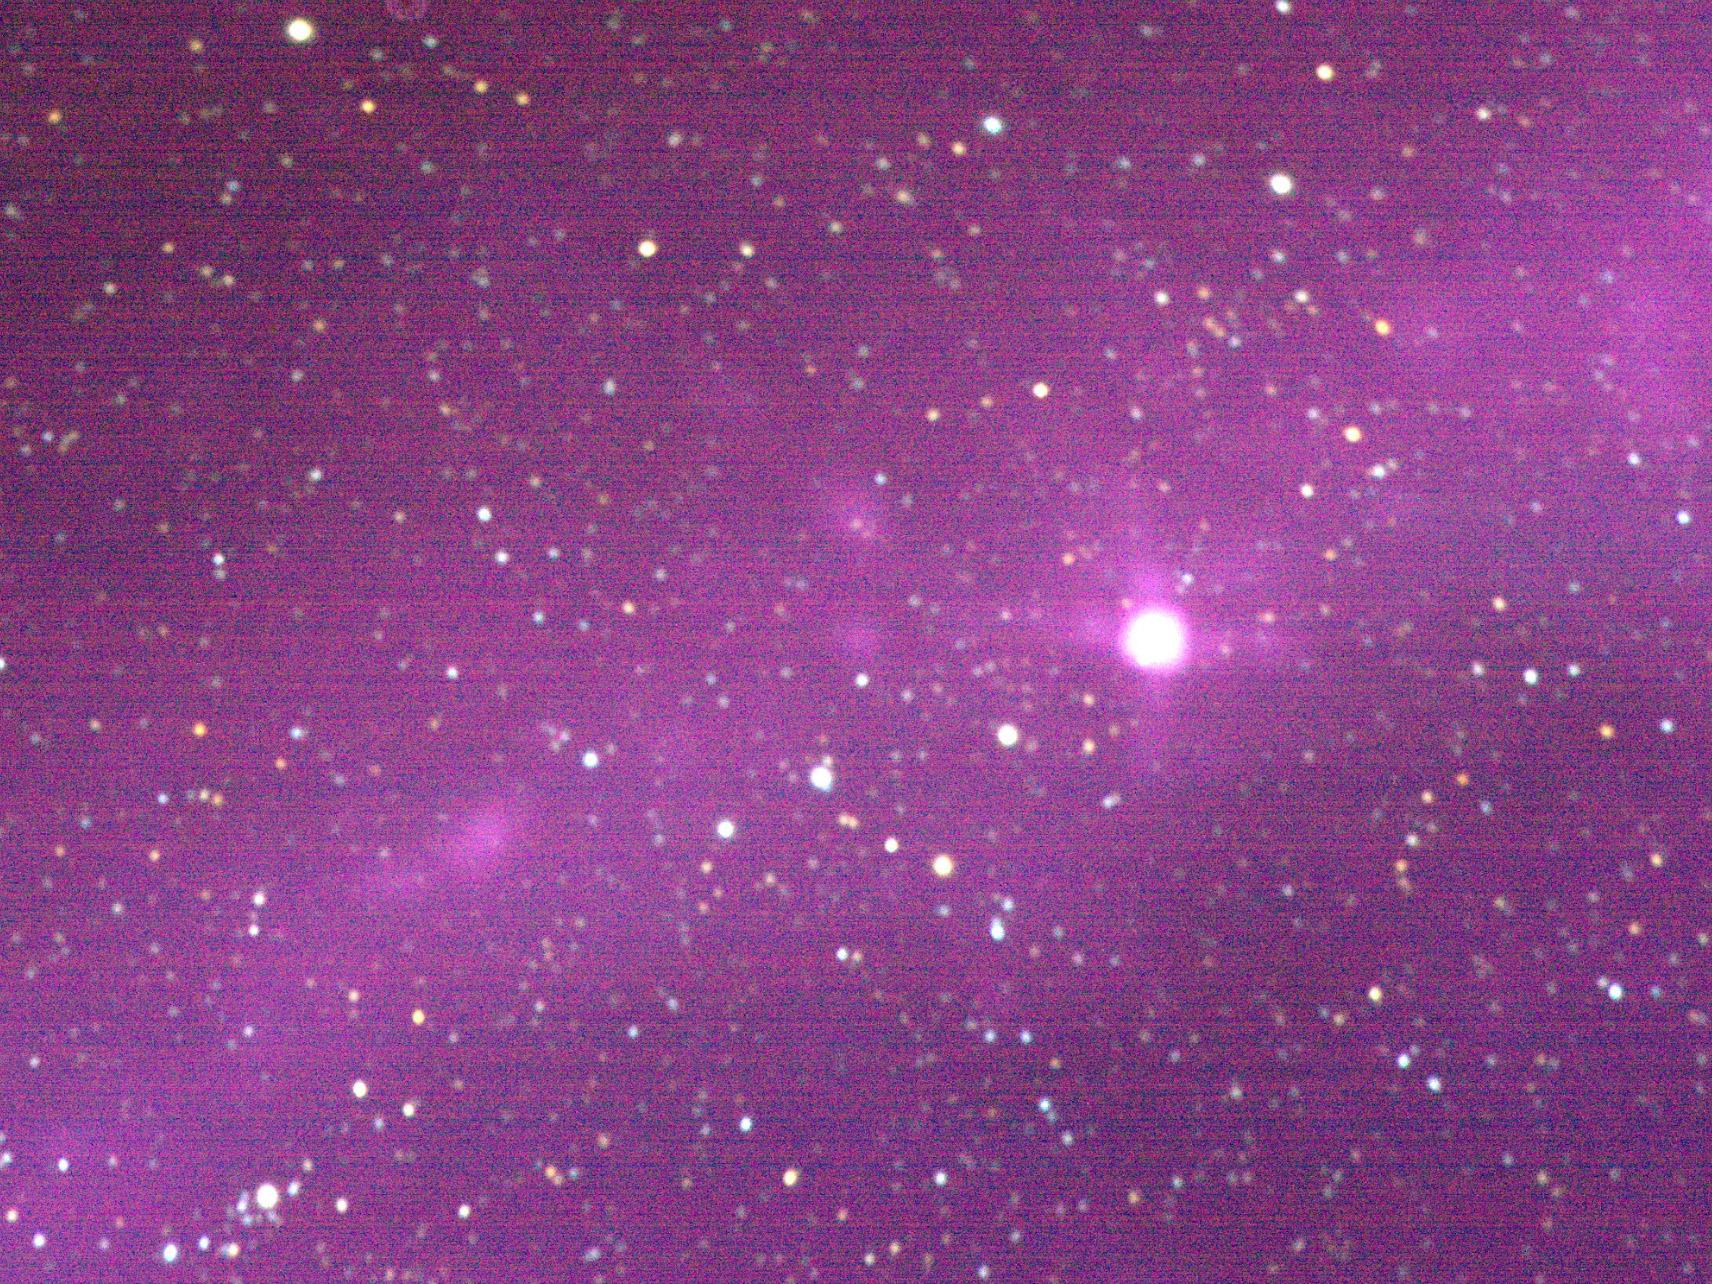 Image of the Cassiopeia constellation from the new upgraded campus planetarium